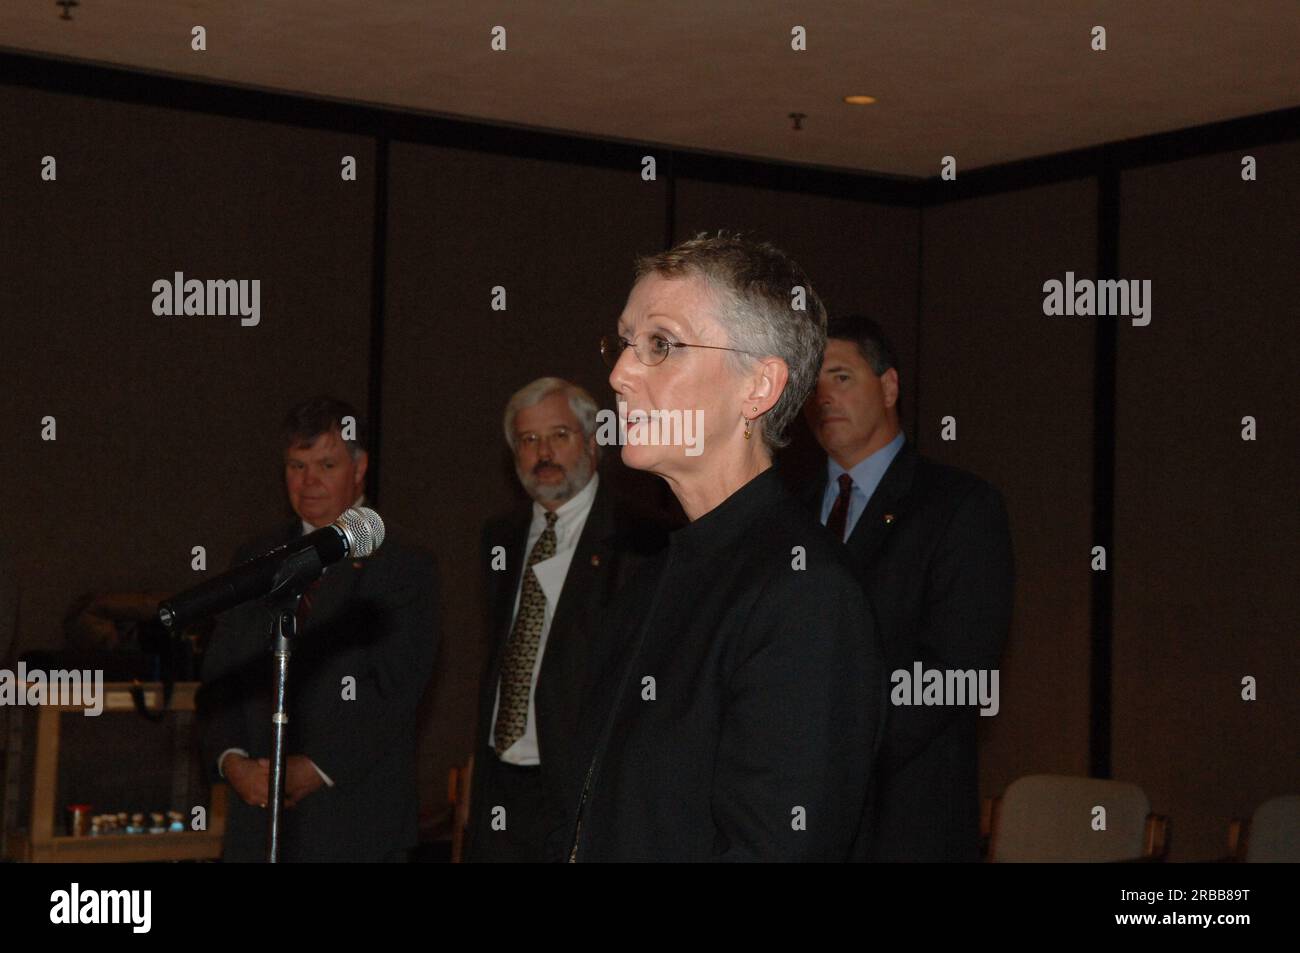 Department of the Interior senior officials, including U.S. Geological Survey (USGS) Acting Director P. Patrick Leahy, at USGS-sponsored presentation on Hurricane Katrina Stock Photo